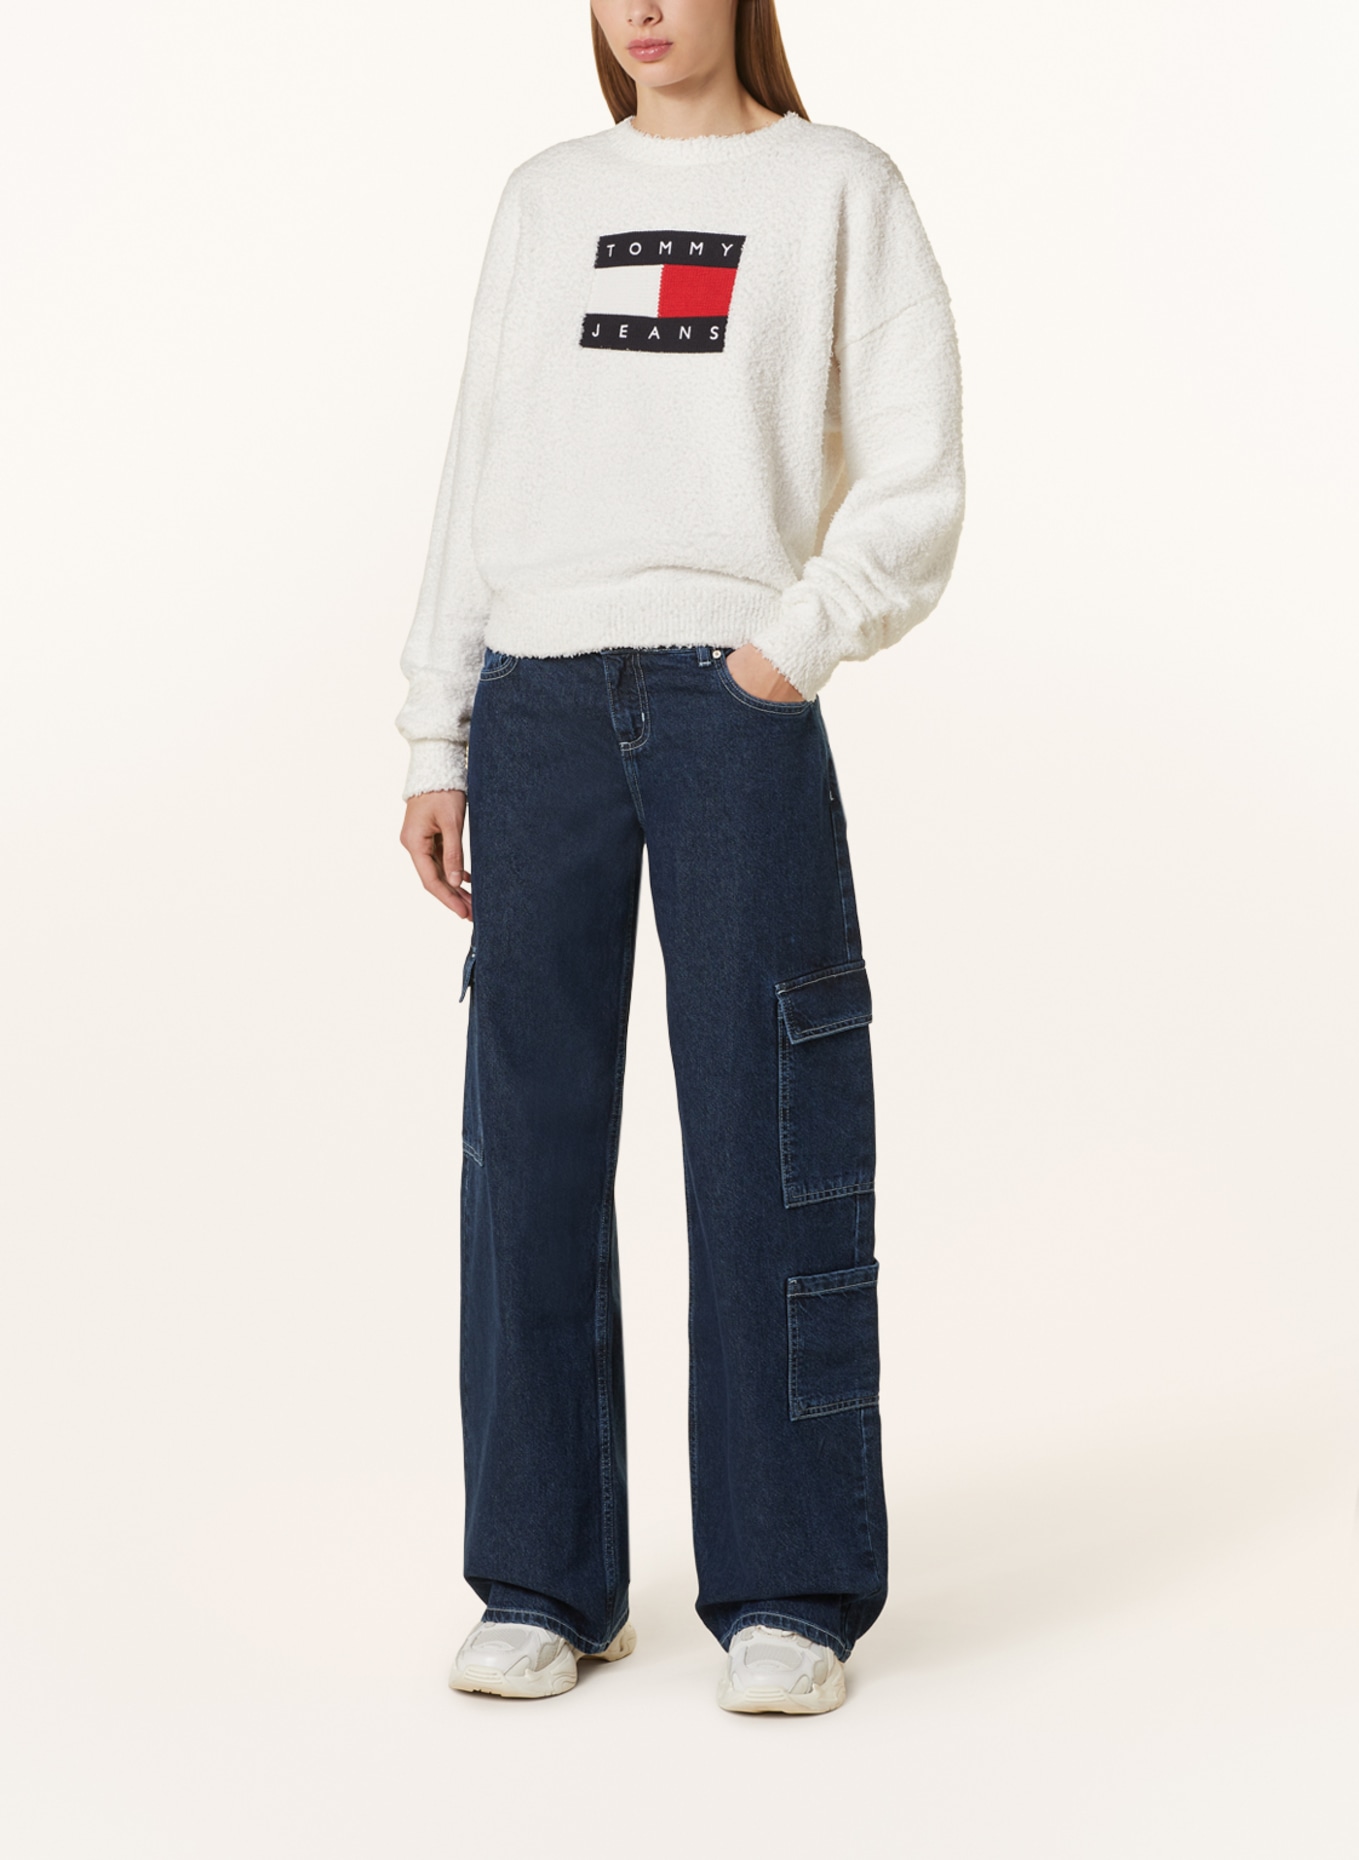 TOMMY JEANS Sweater, Color: WHITE/ DARK BLUE/ RED (Image 2)